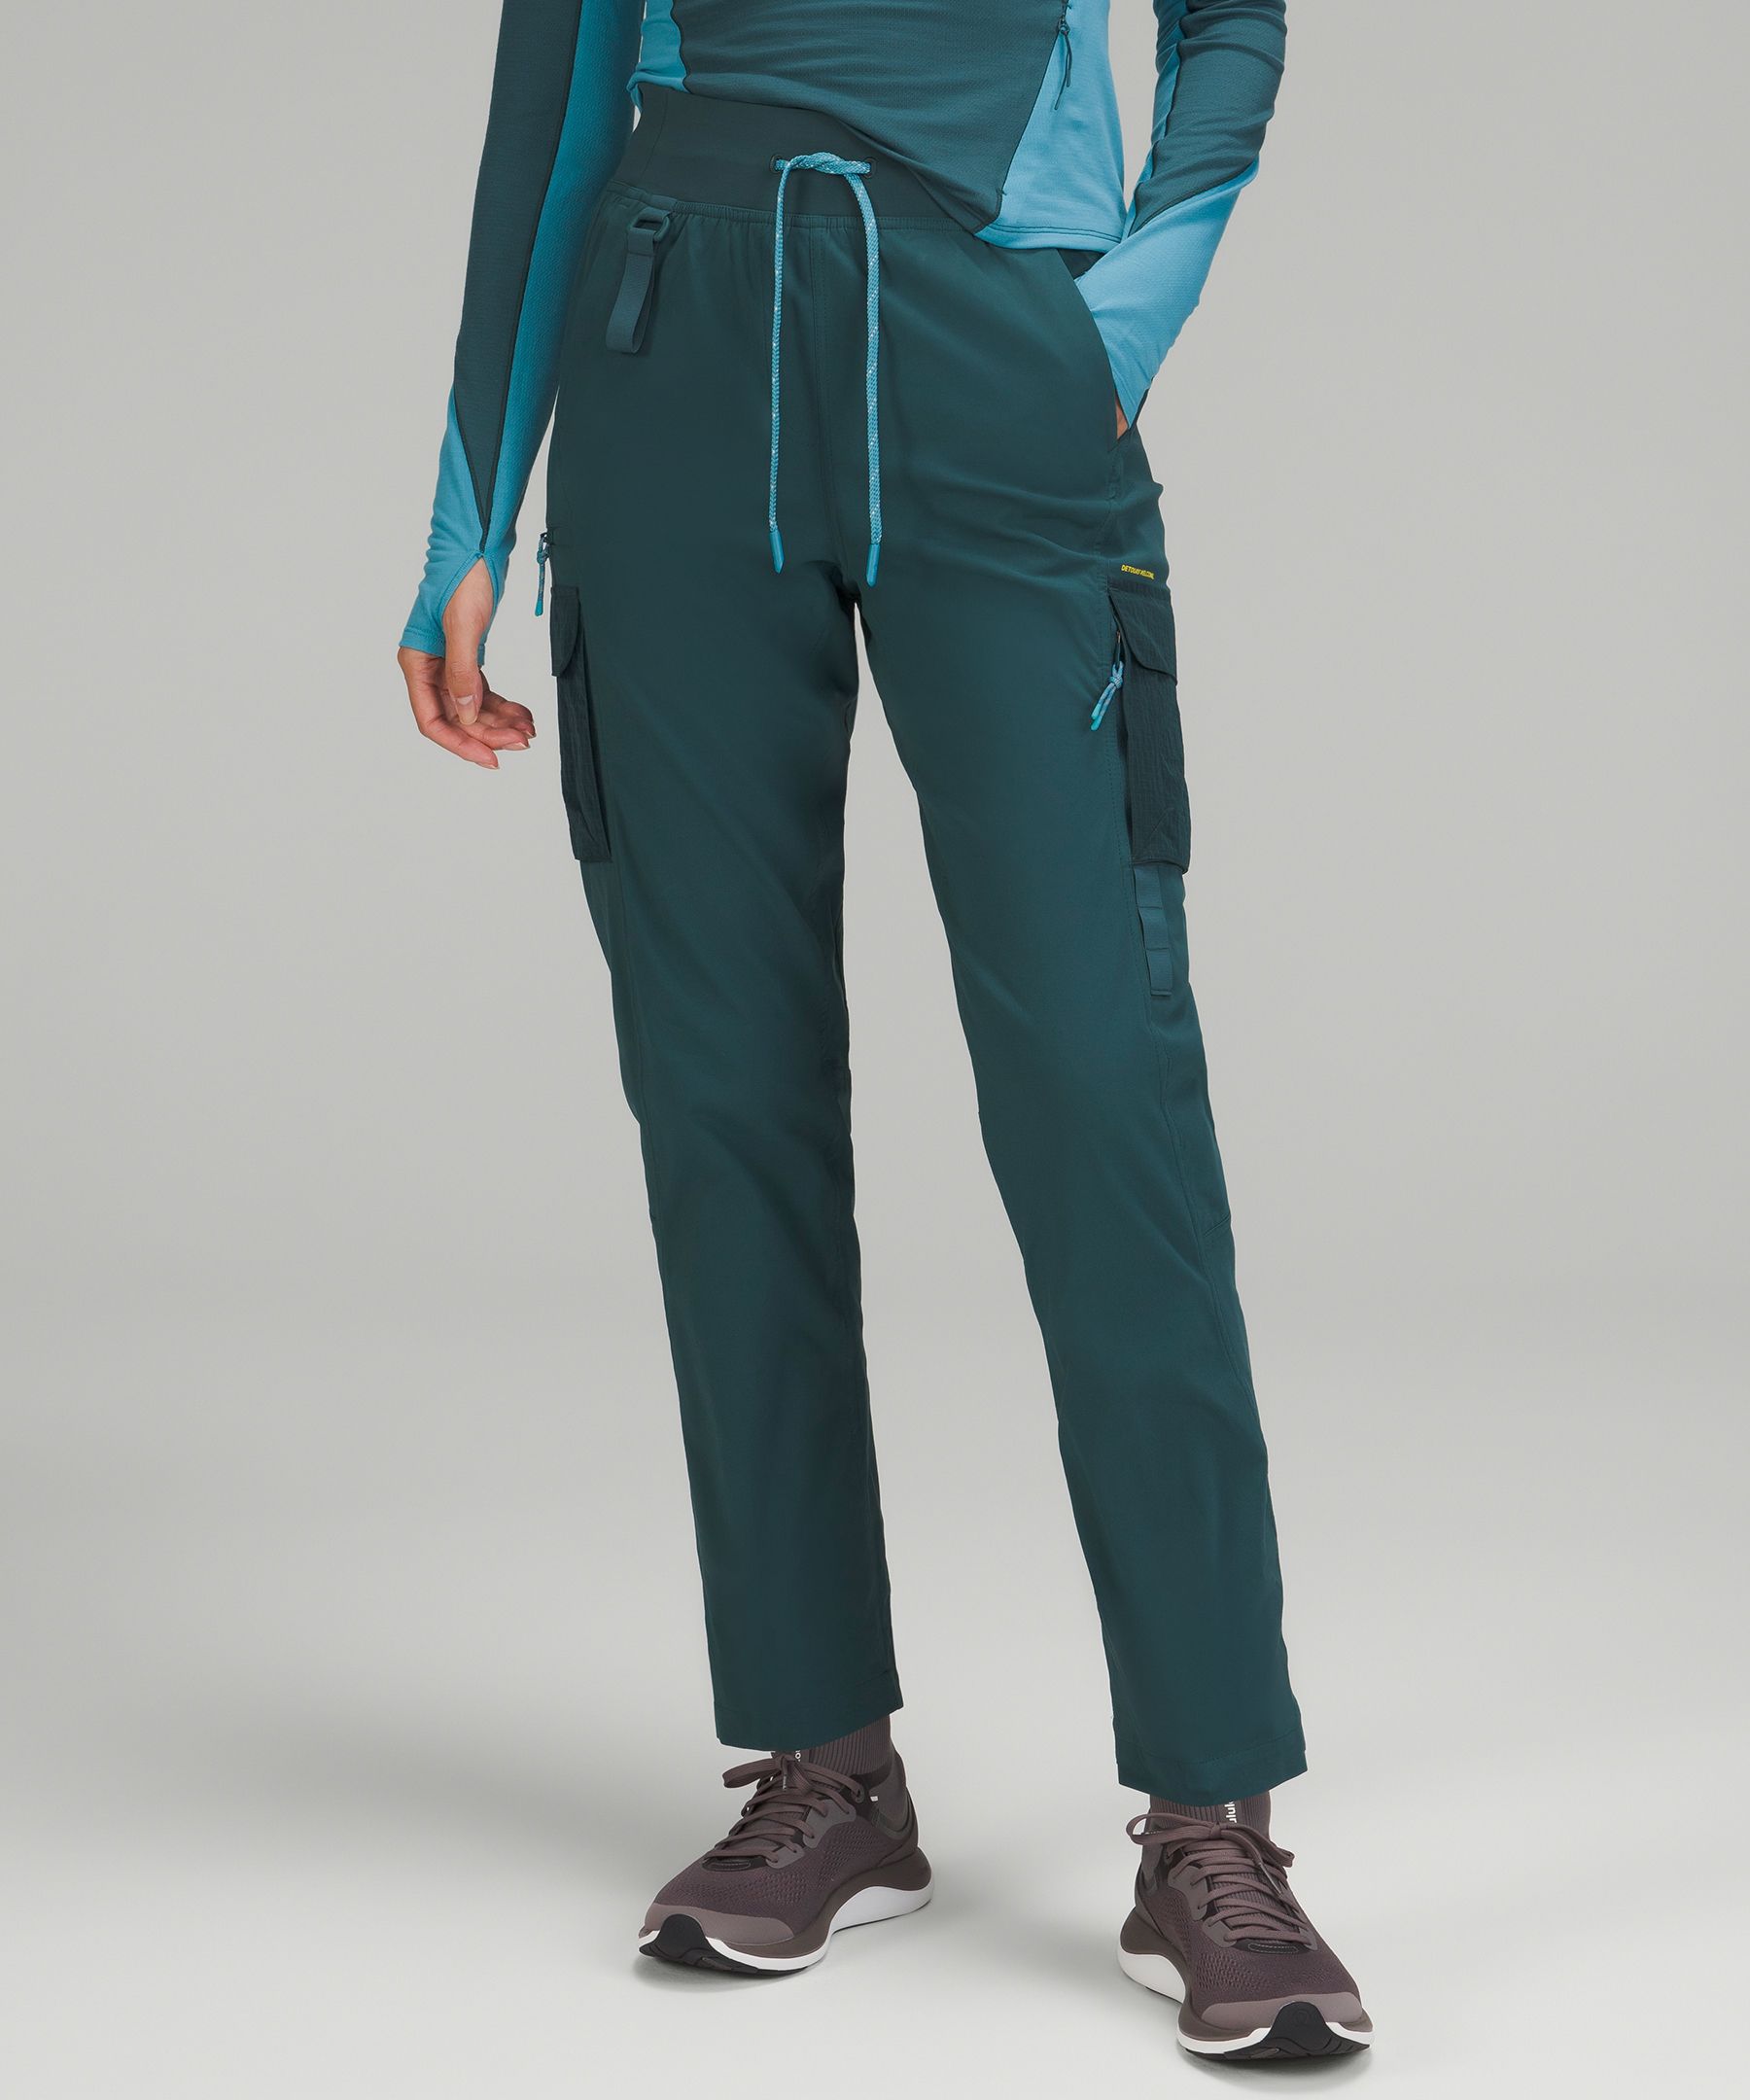 Women's Lined Cargo Pant, Pants